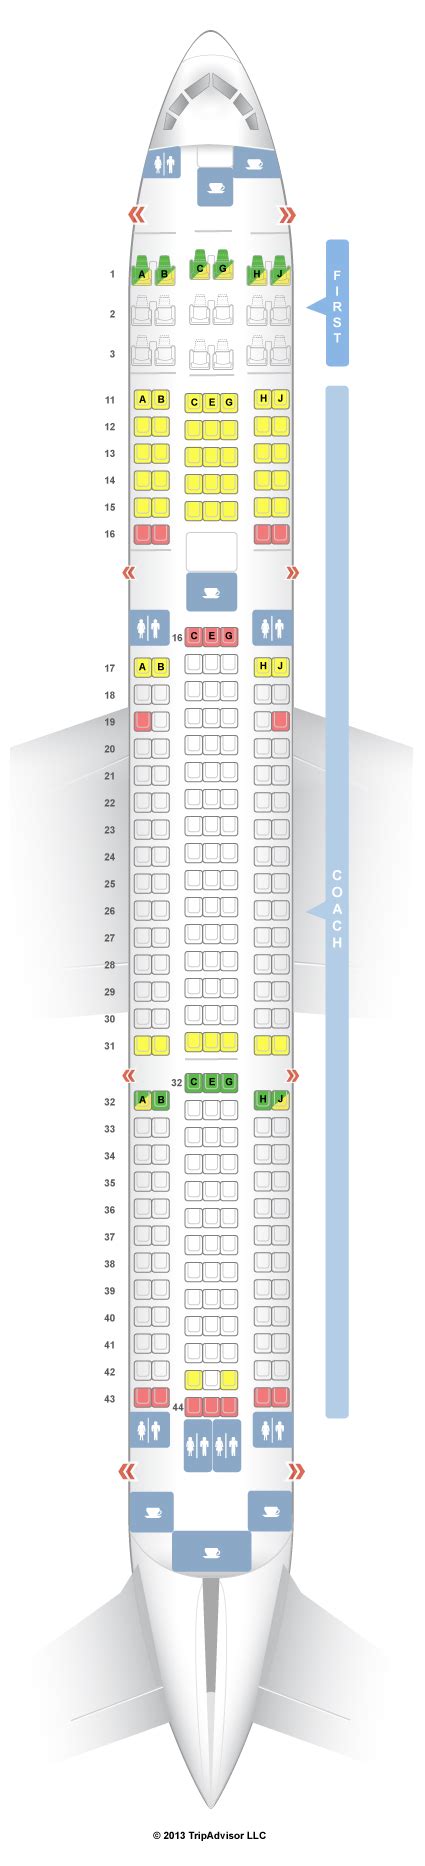 Seatguru hawaiian. Submitted by SeatGuru User on 2019/10/19 for Seat 25F. This was Delta 845 (N859DN) from Atlanta to West Palm Beach. Row 25, either A or F, has 2 windows. The legroom is good for economy seats, and this seat is located on the back of the wing with a perfect view of the flaps and, if applicable, the split scimitars. 